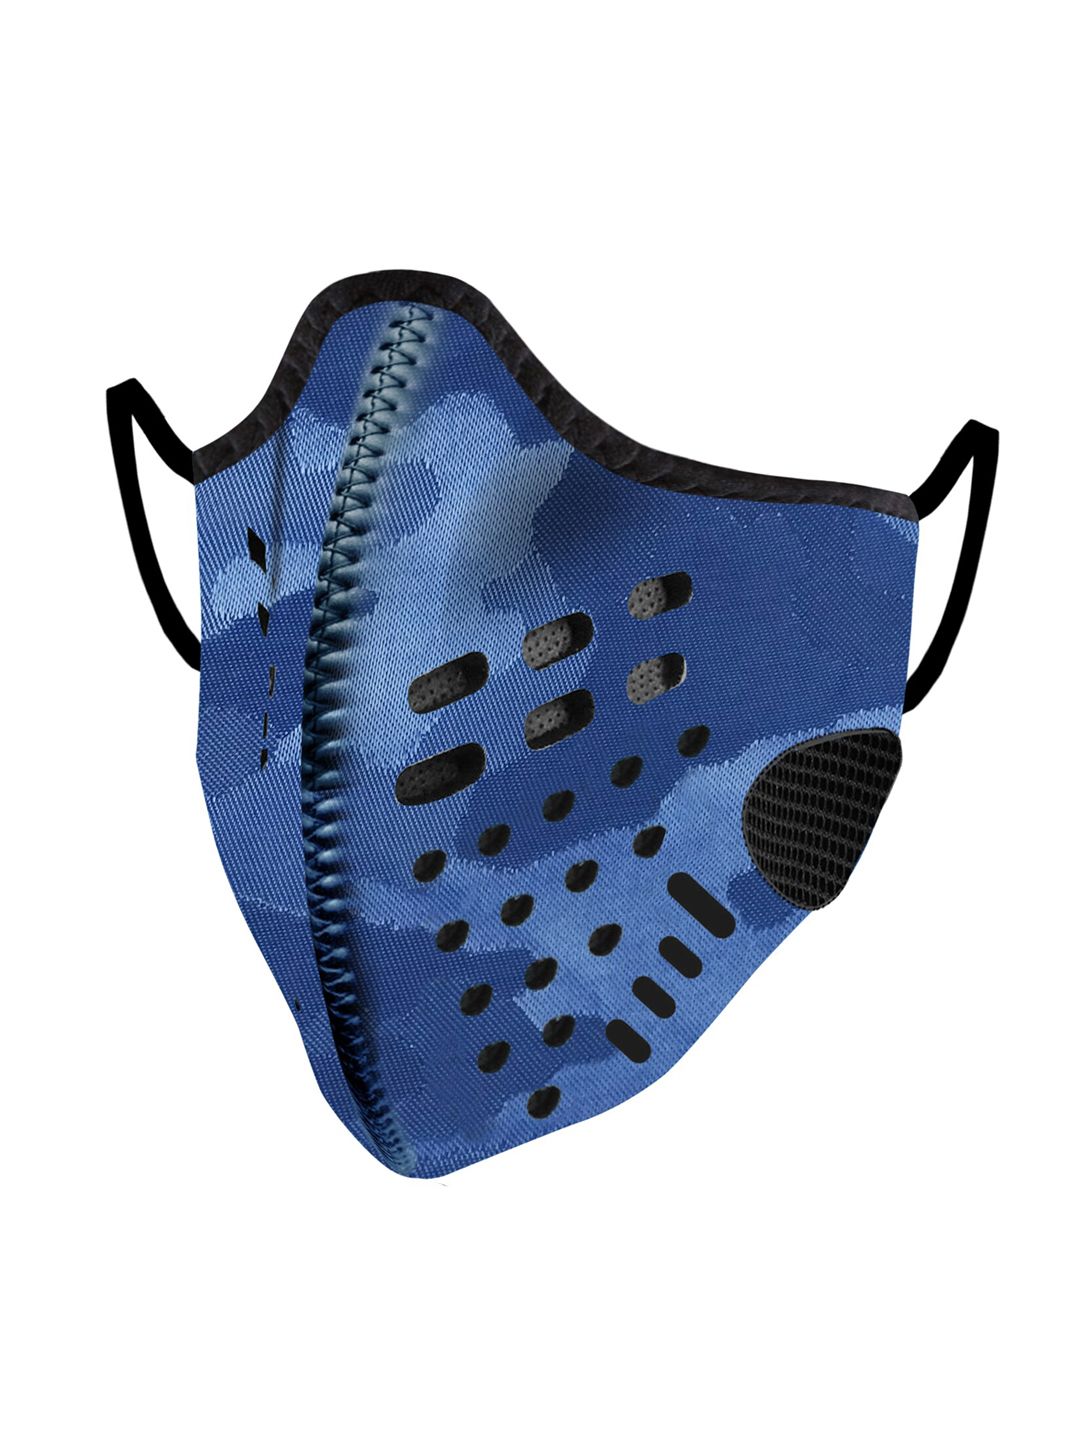 Lioncrown Unisex Blue Anti-Bacterial Outdoor Face Mask Price in India